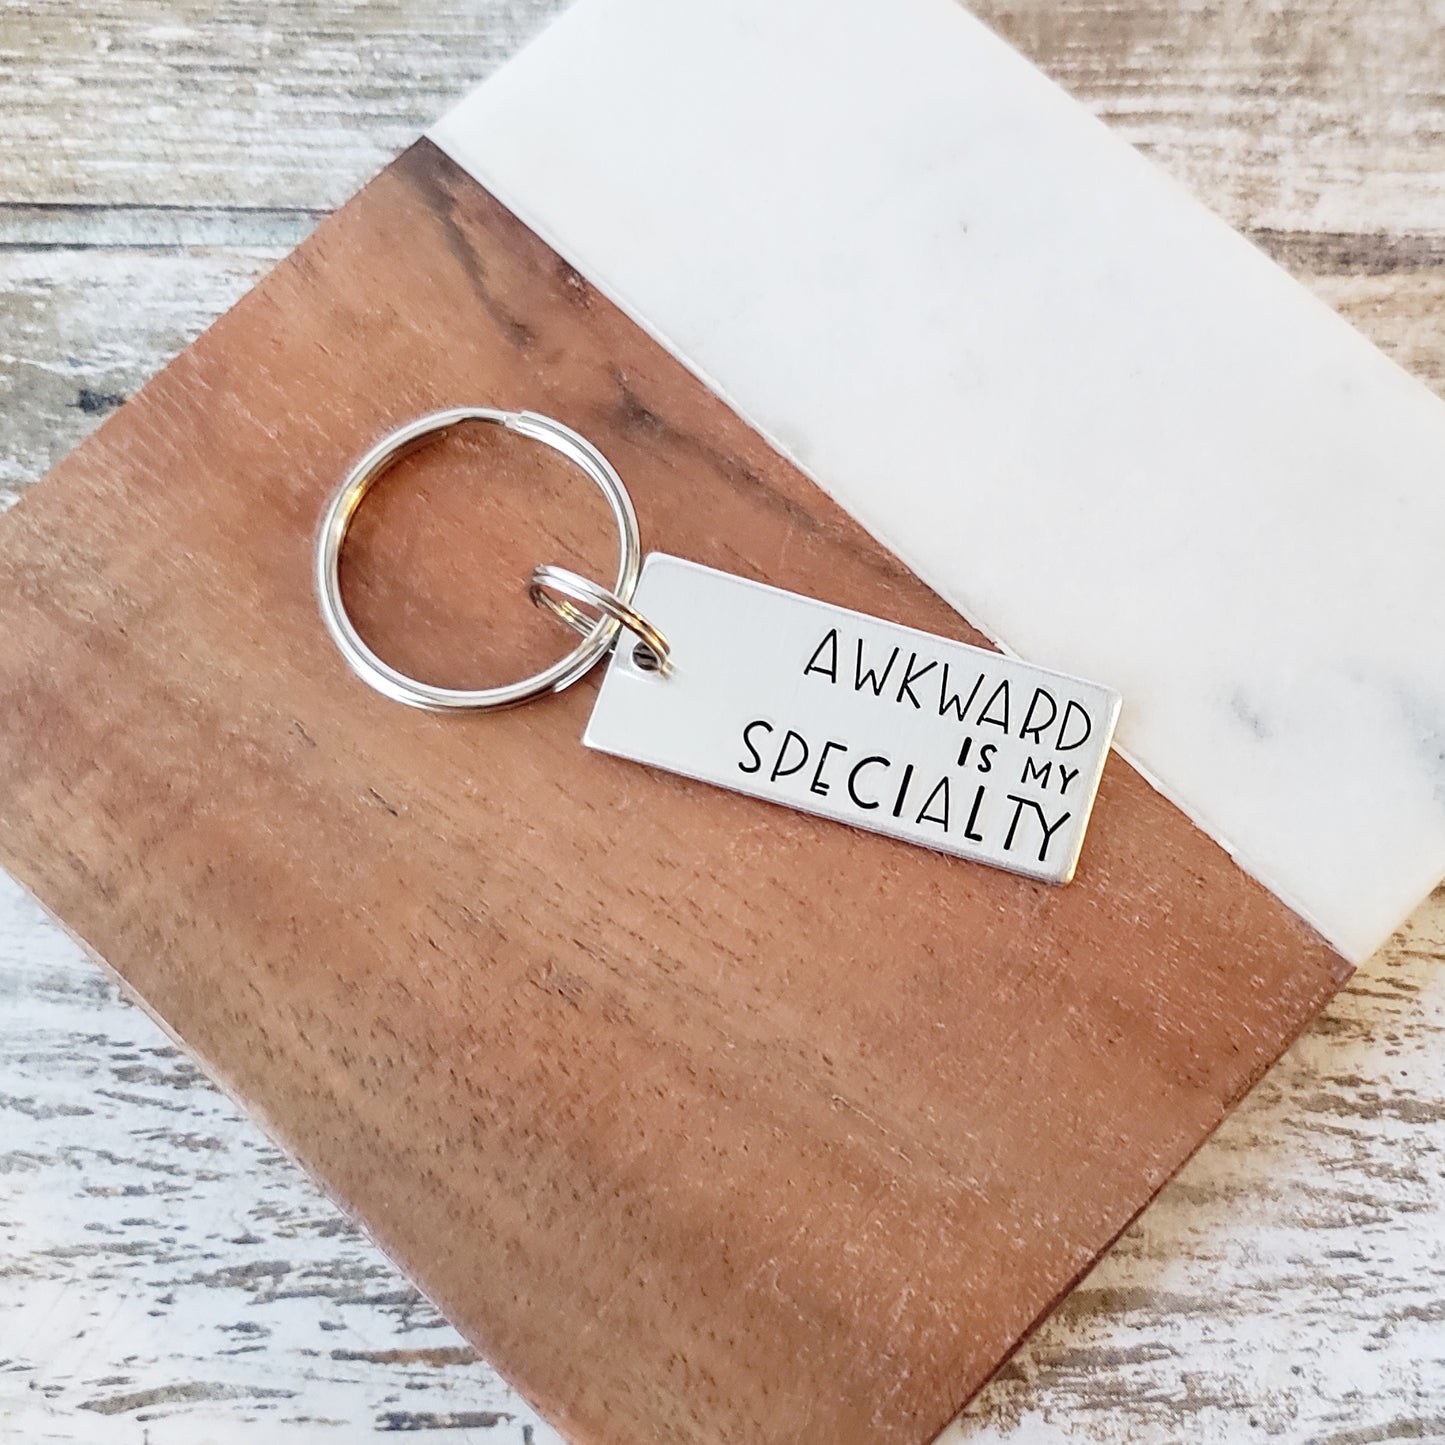 Awkward Is My Specialty Keychain, Funny Hand Stamped Keychain for Friend